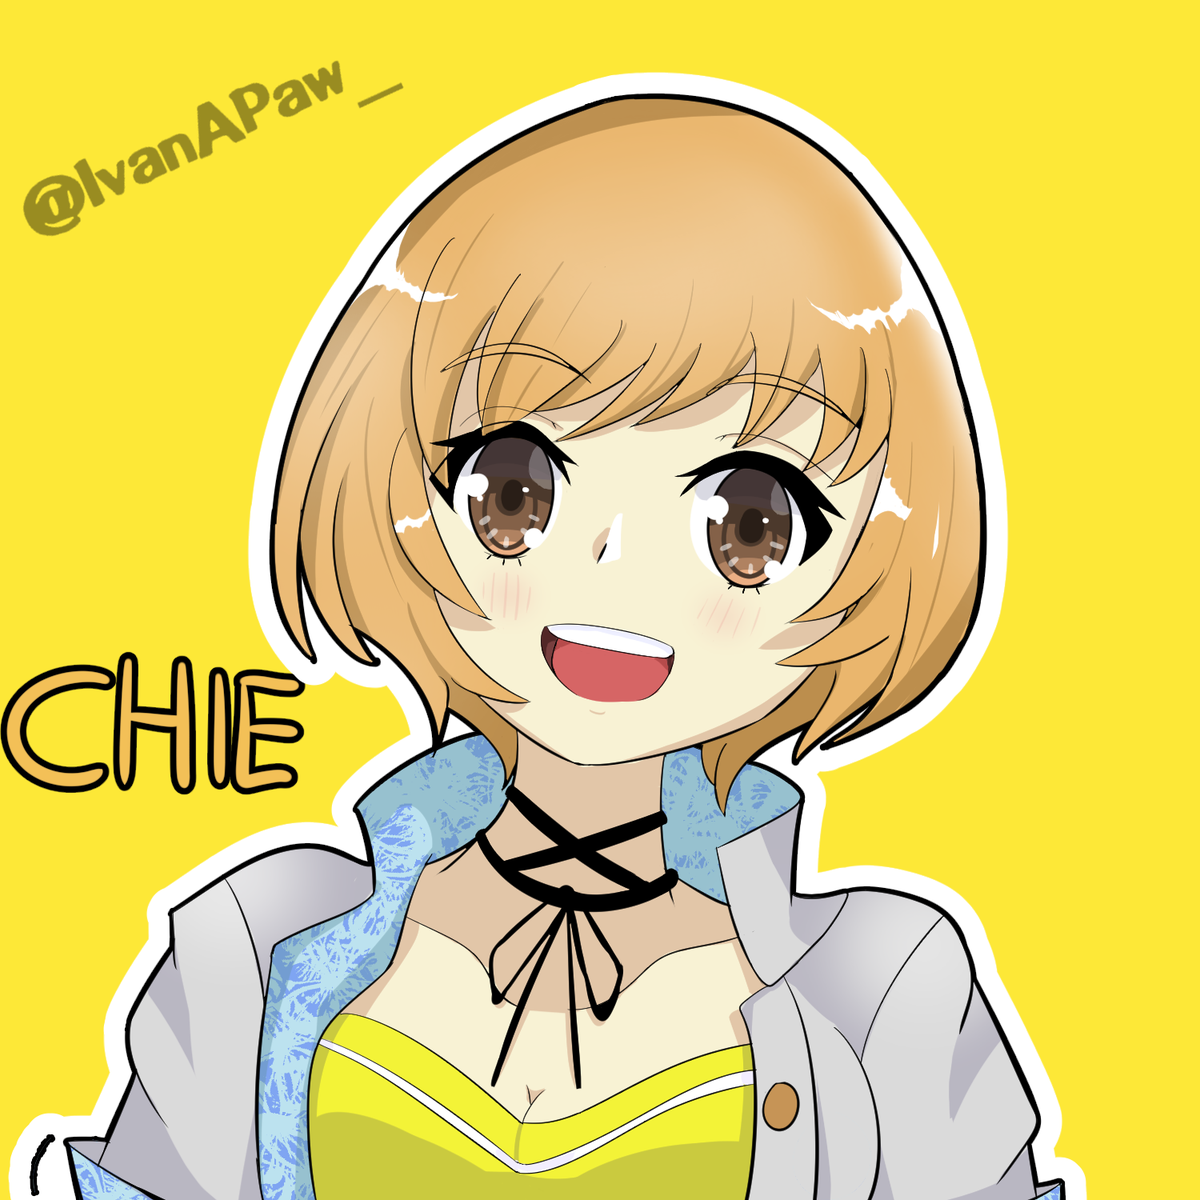 Ivanpaw Commisions Open 73 Chie Birthday Of My Favorite Persona 4 Character 里中千枝誕生祭 里中千枝 Persona4golden